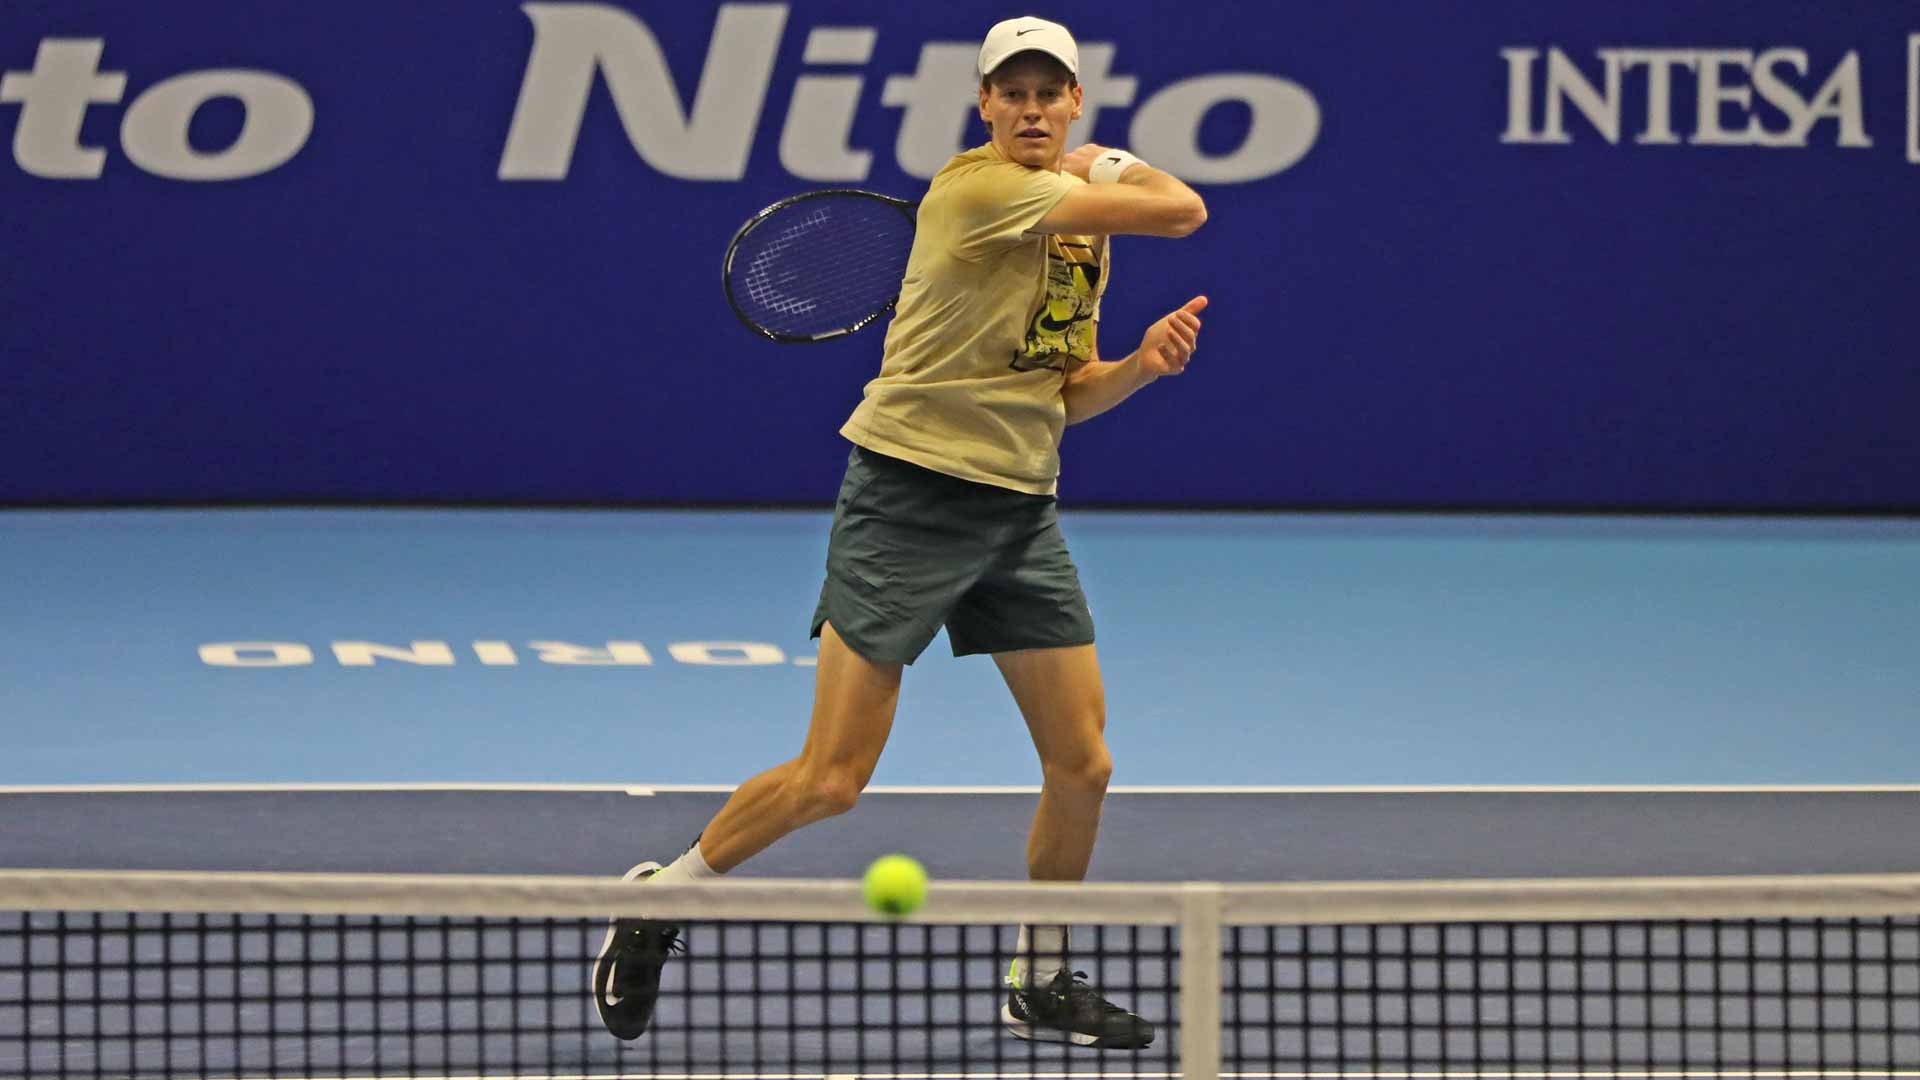 Jannik Sinner is the lone Italian who will compete in this year's Nitto ATP Finals.